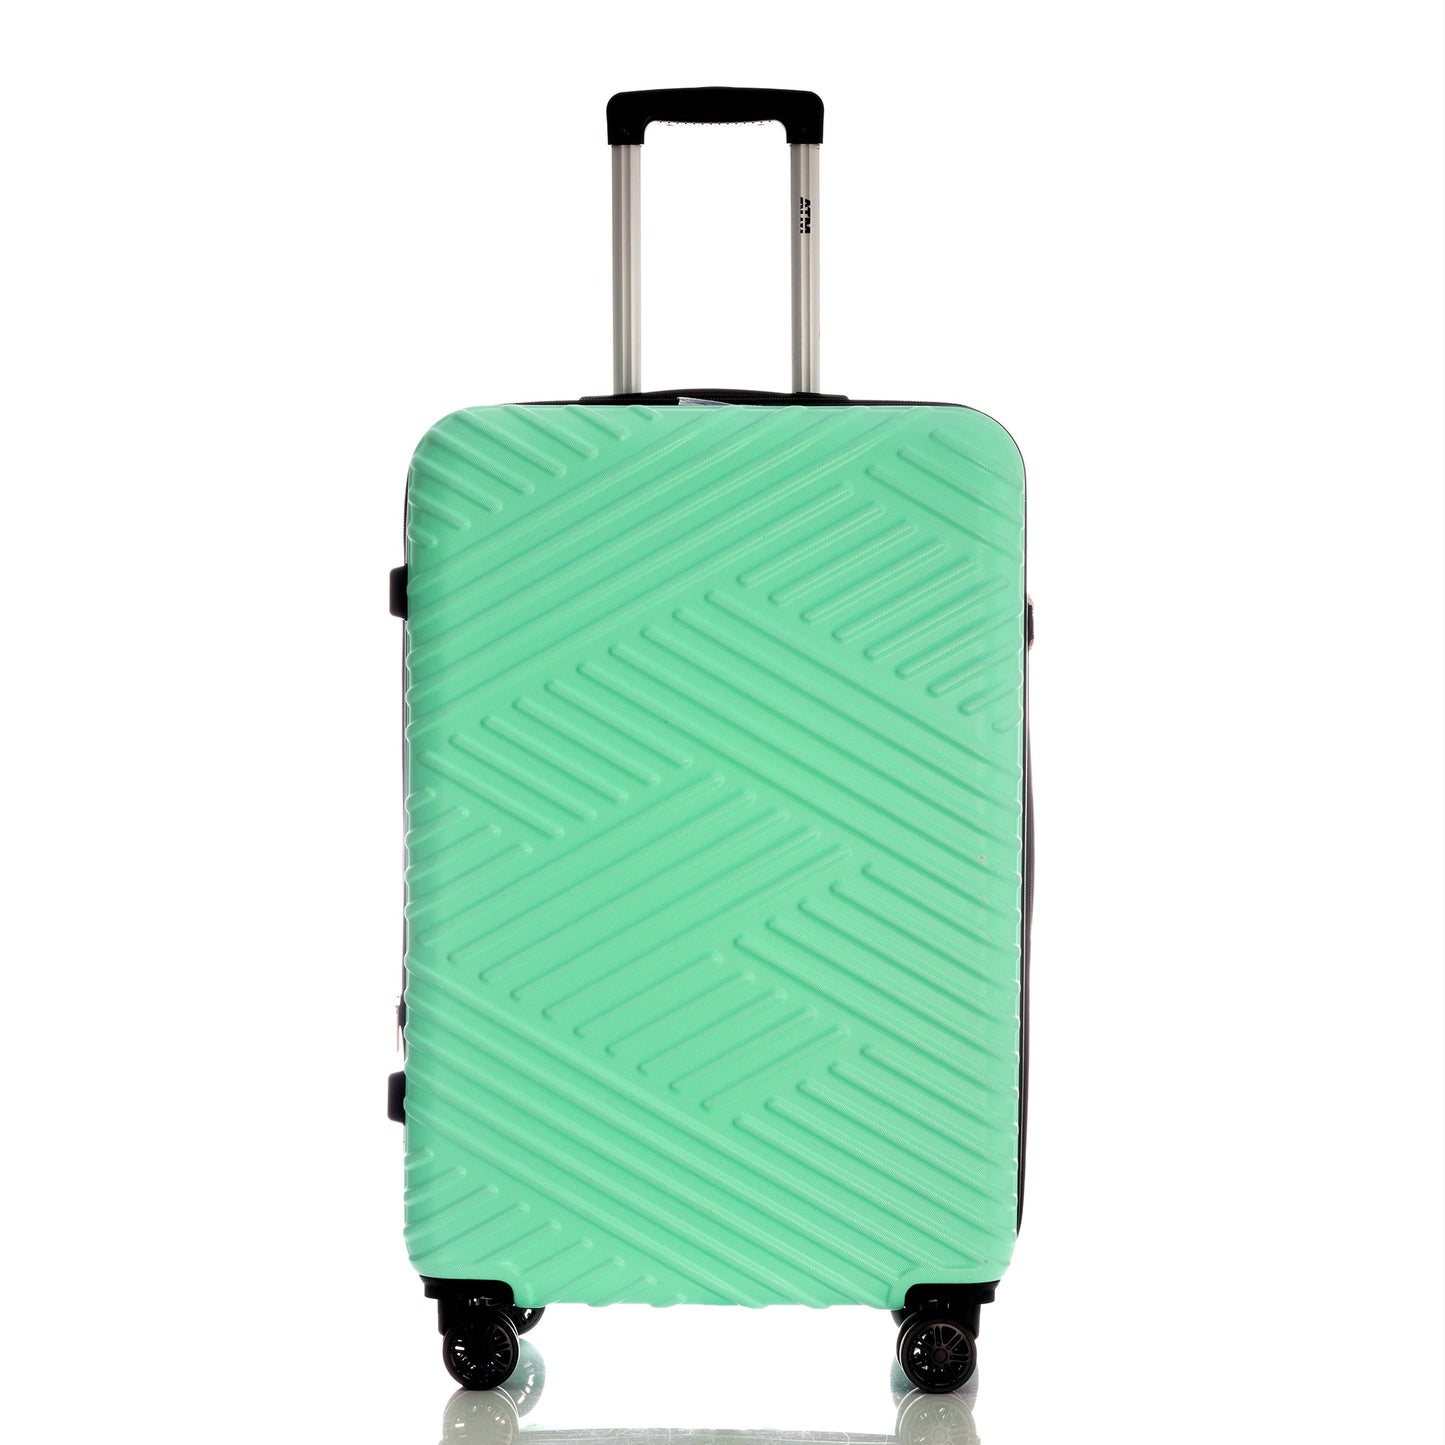 Neon Collection Turquoise Luggage (21/25/29") Suitcase Lock Spinner Hardshell